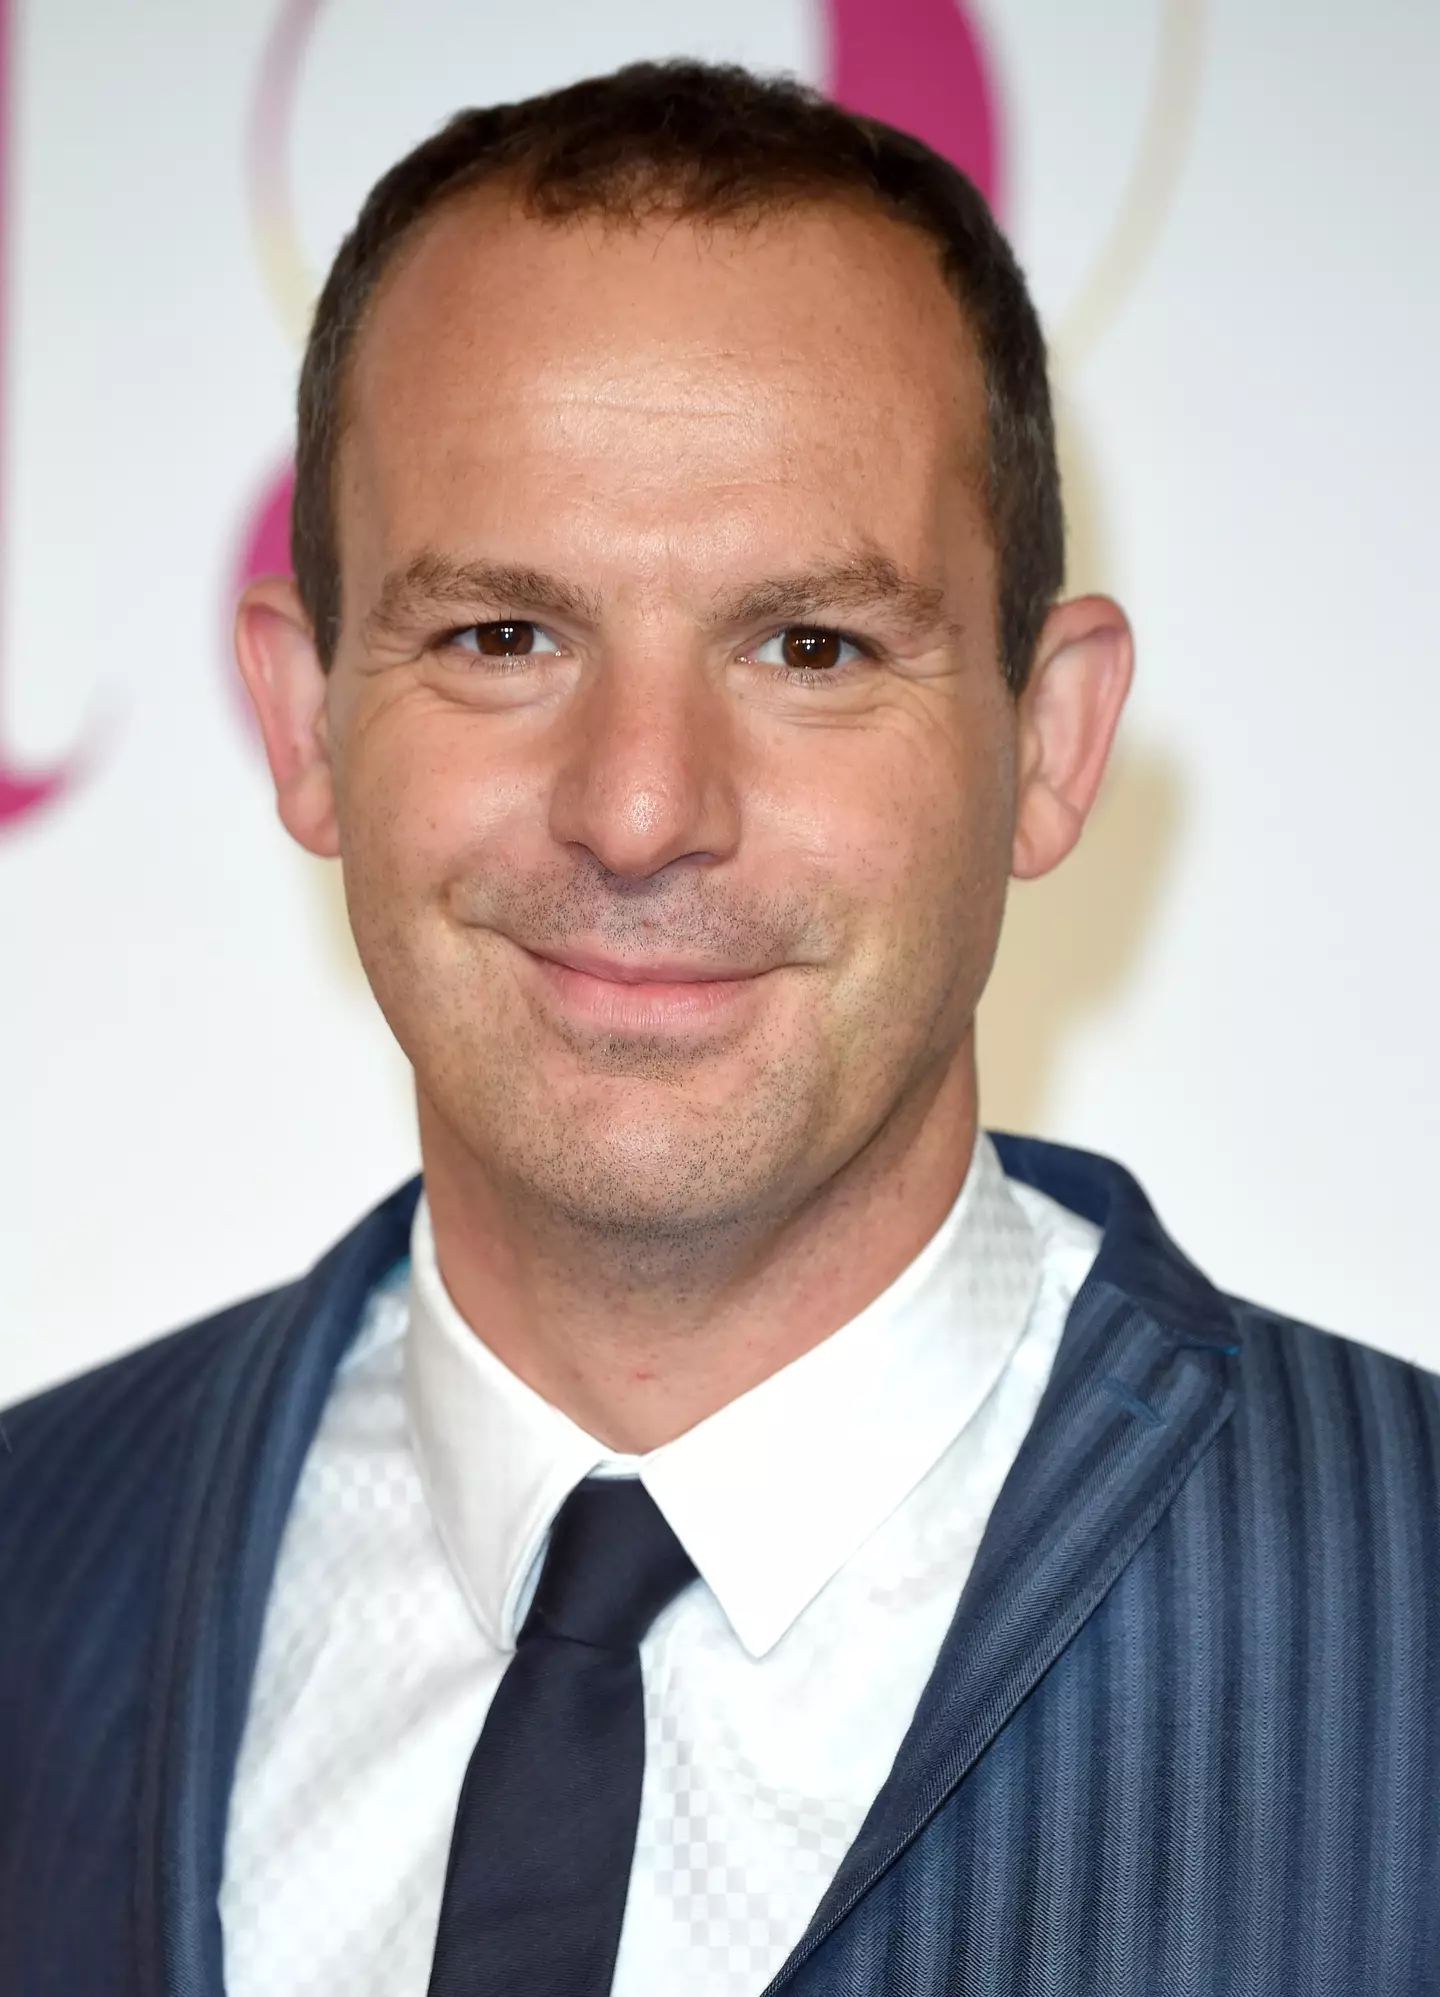 Martin Lewis often shares advice on how people can save or get more money.